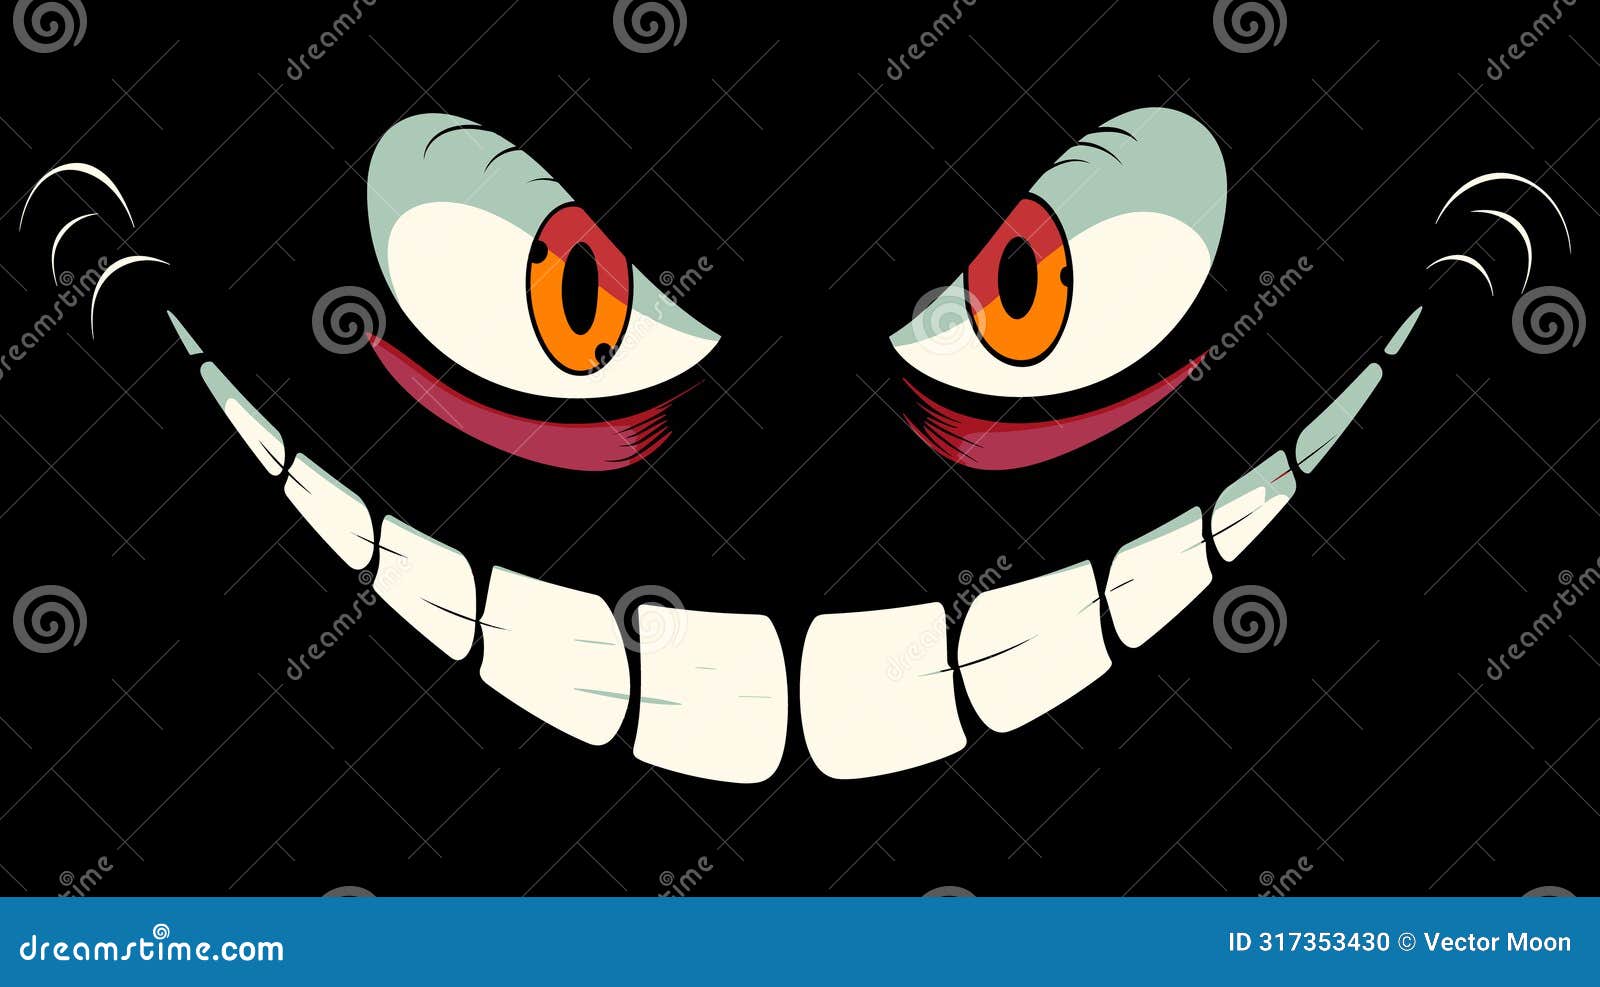 creepy smile cartoon face, red eyes menacing grin. scary cheshire cat impression dark background